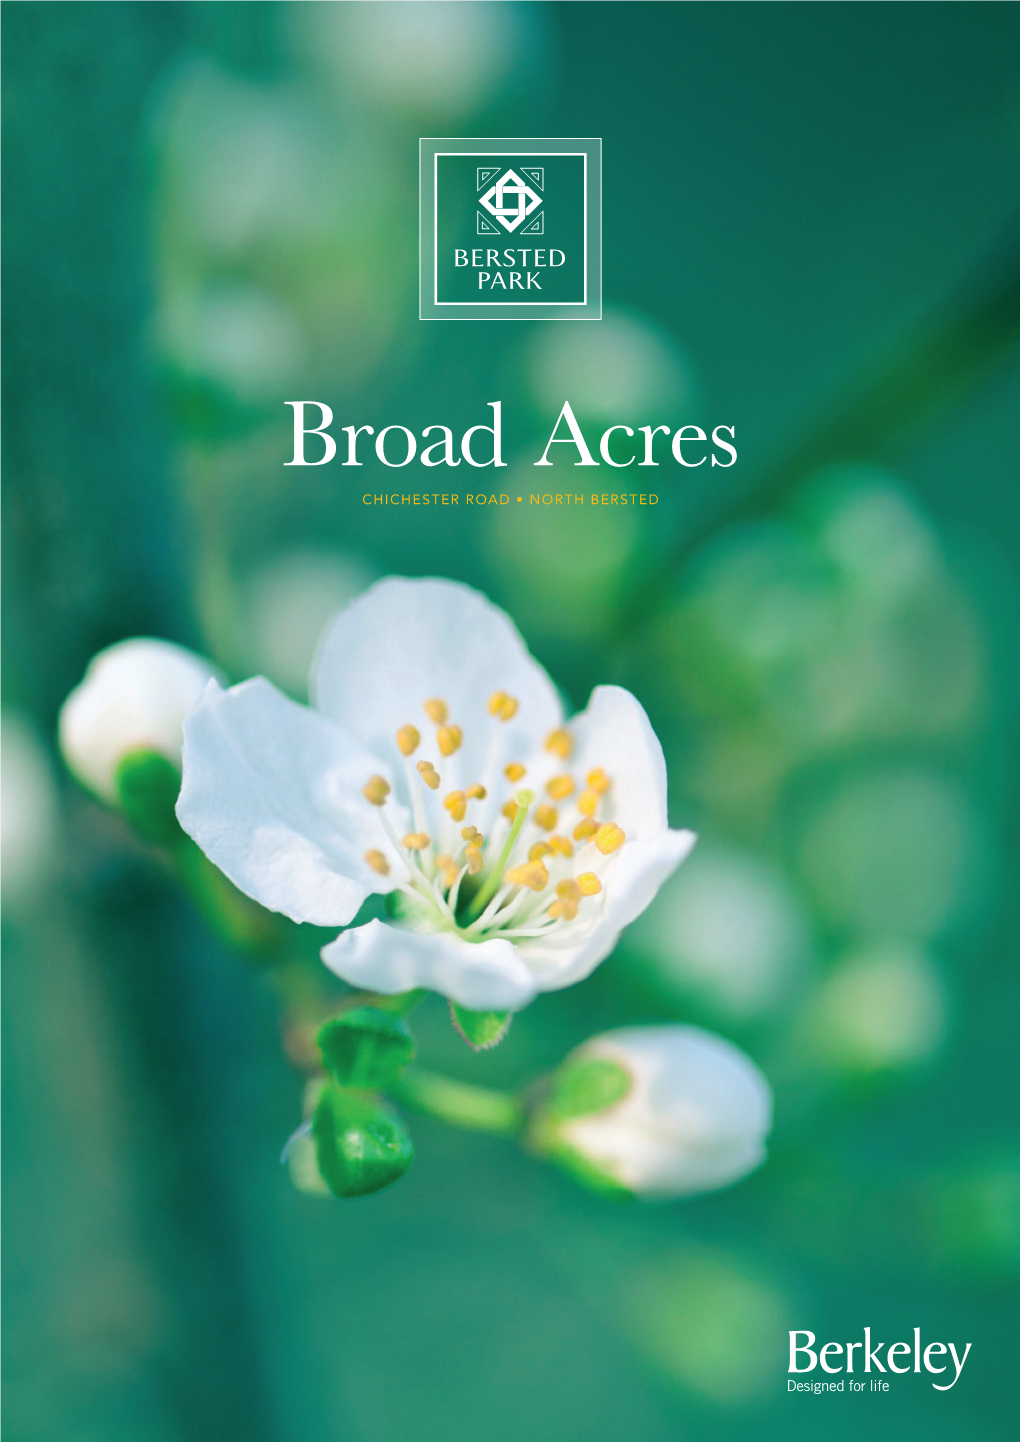 Your Exciting New Life Awaits You at Broad Acres, Bersted Park